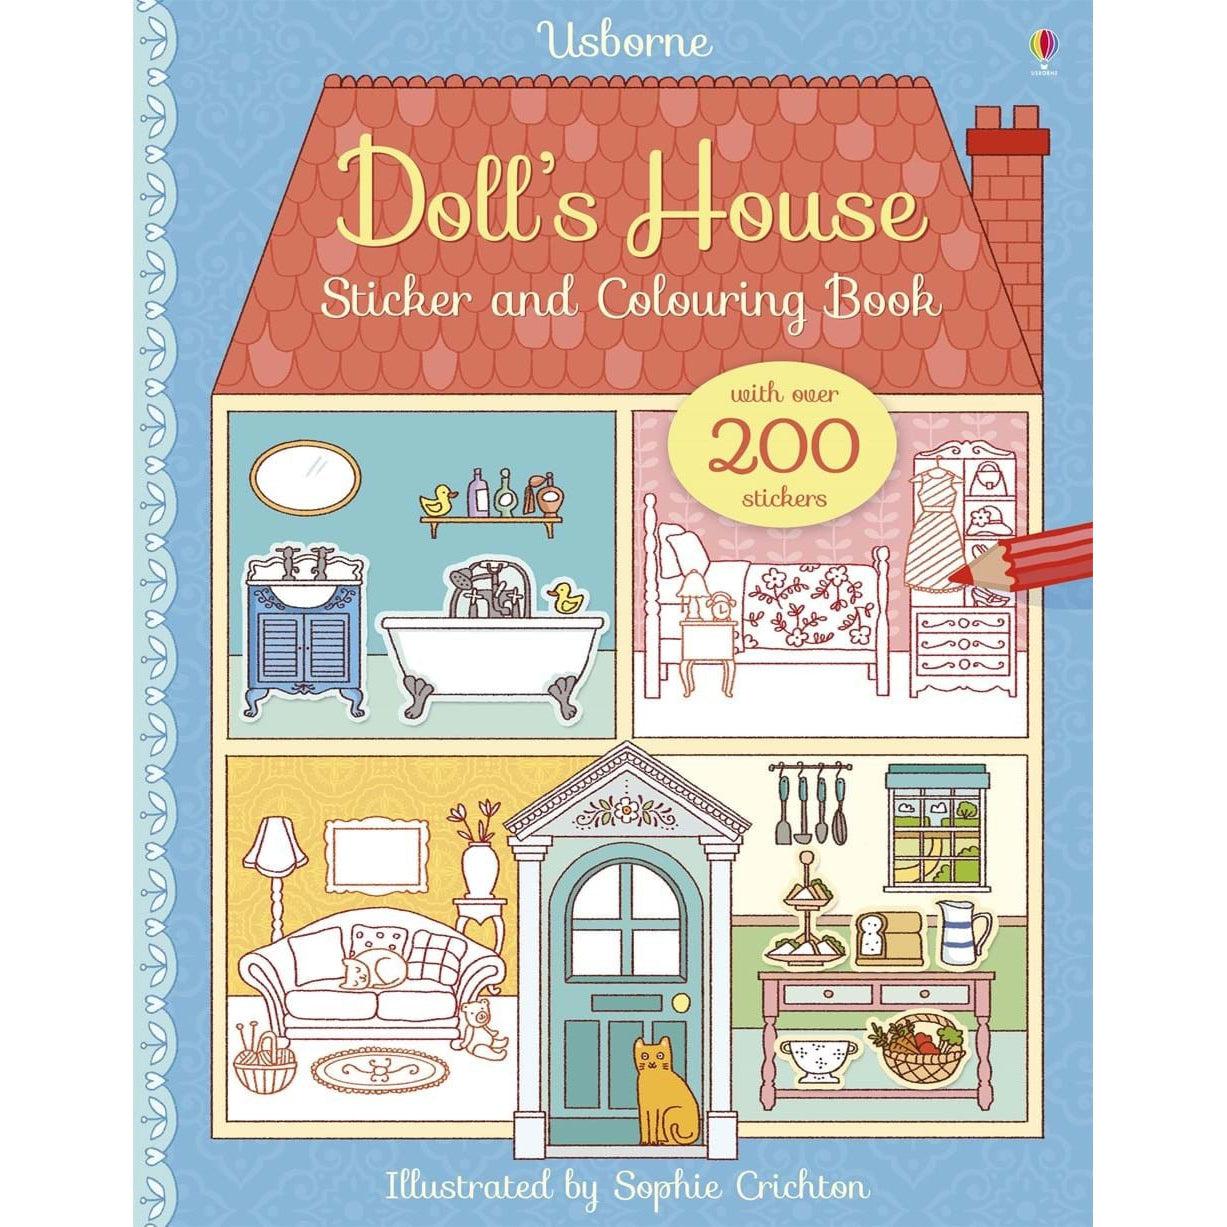 Doll's House Sticker And Colouring Book